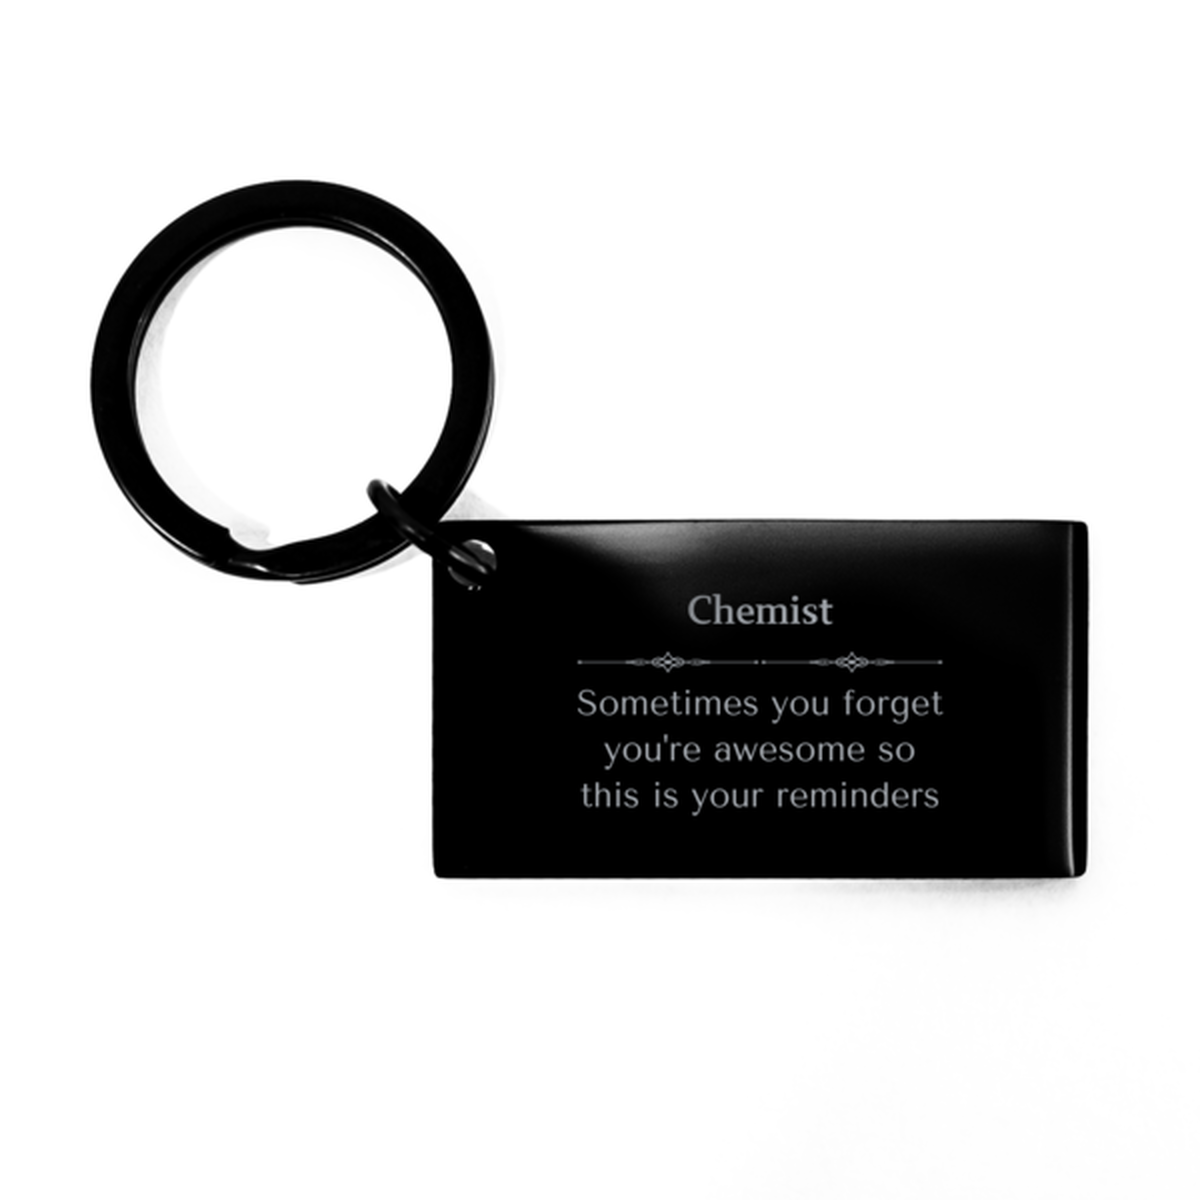 Sentimental Chemist Keychain, Developer Sometimes you forget you're awesome so this is your reminders, Graduation Christmas Birthday Gifts for Chemist, Men, Women, Coworkers